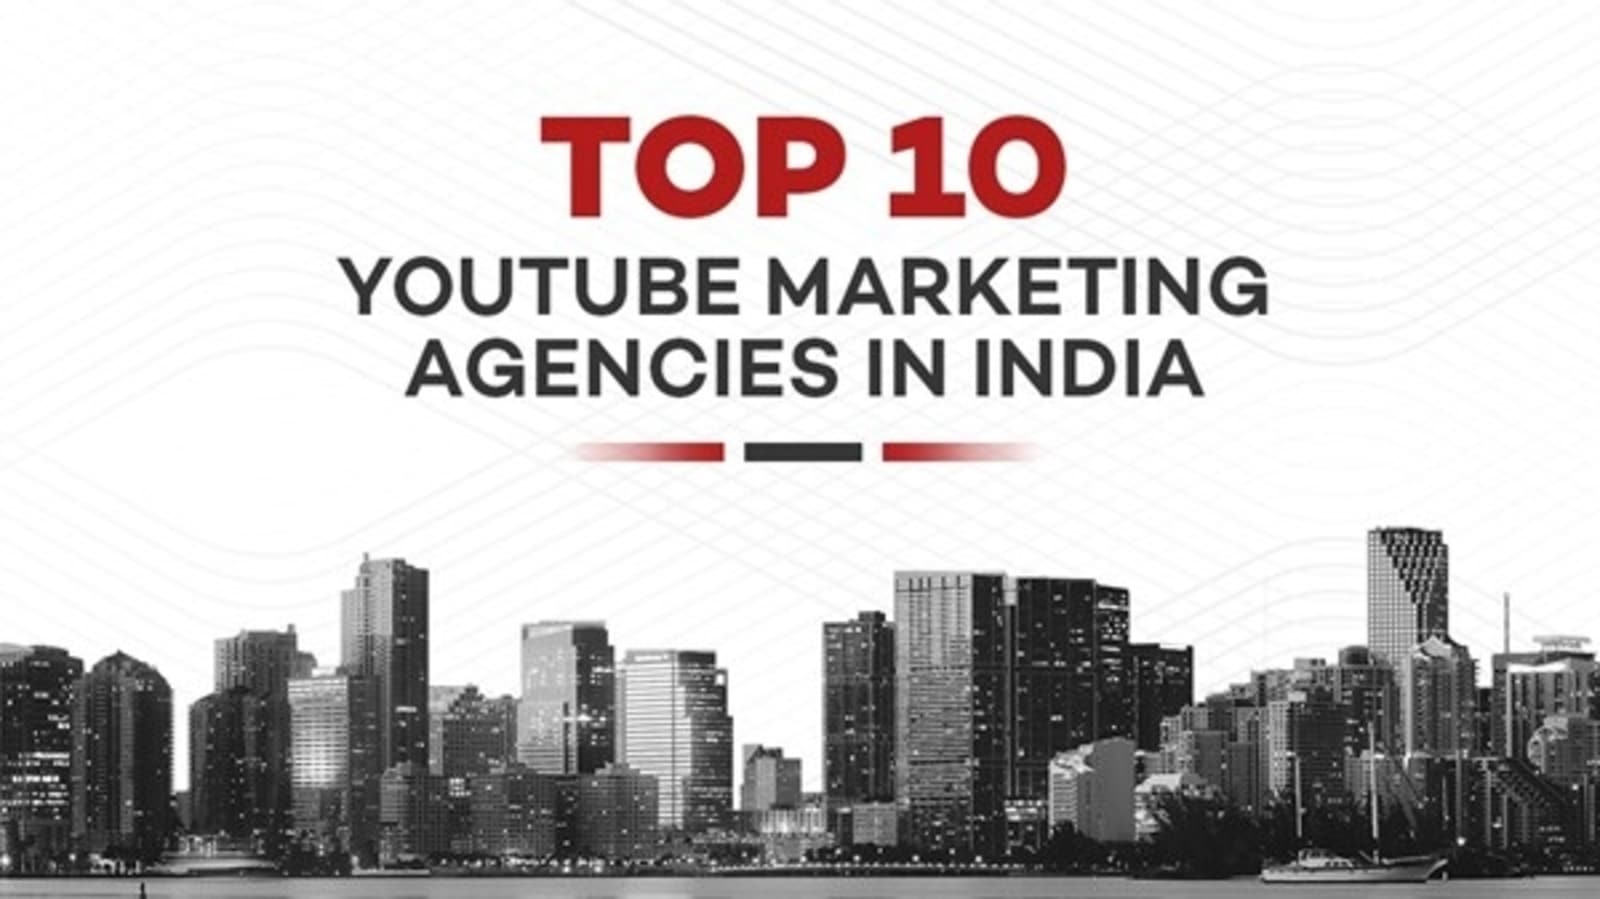 Which Are The Top 10 YouTube Marketing Agencies/Companies In India?